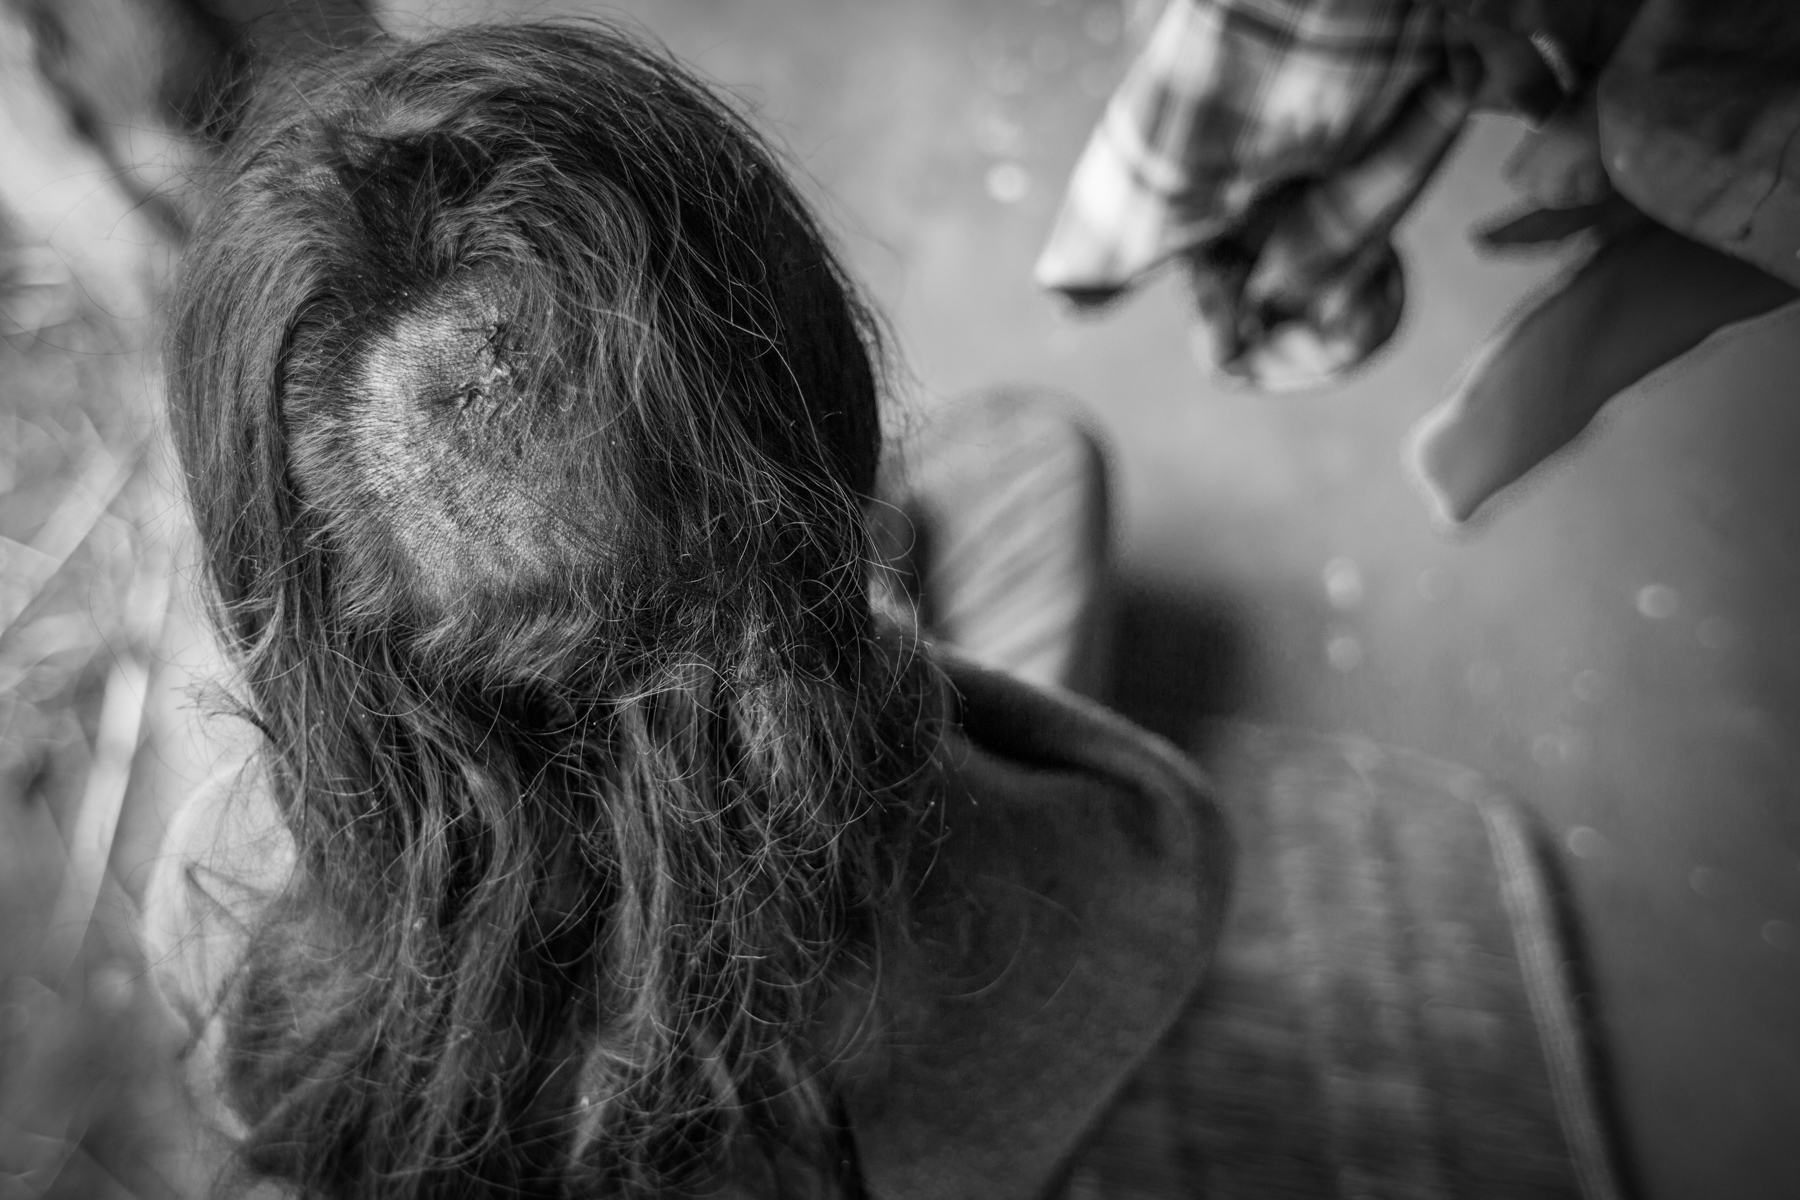 Pampha Magriti, 30, a Dalit woman, was severely beaten when she tried to help Chanamati Maggrati during the attack. 17 December 2013, Dhading, Nepal.